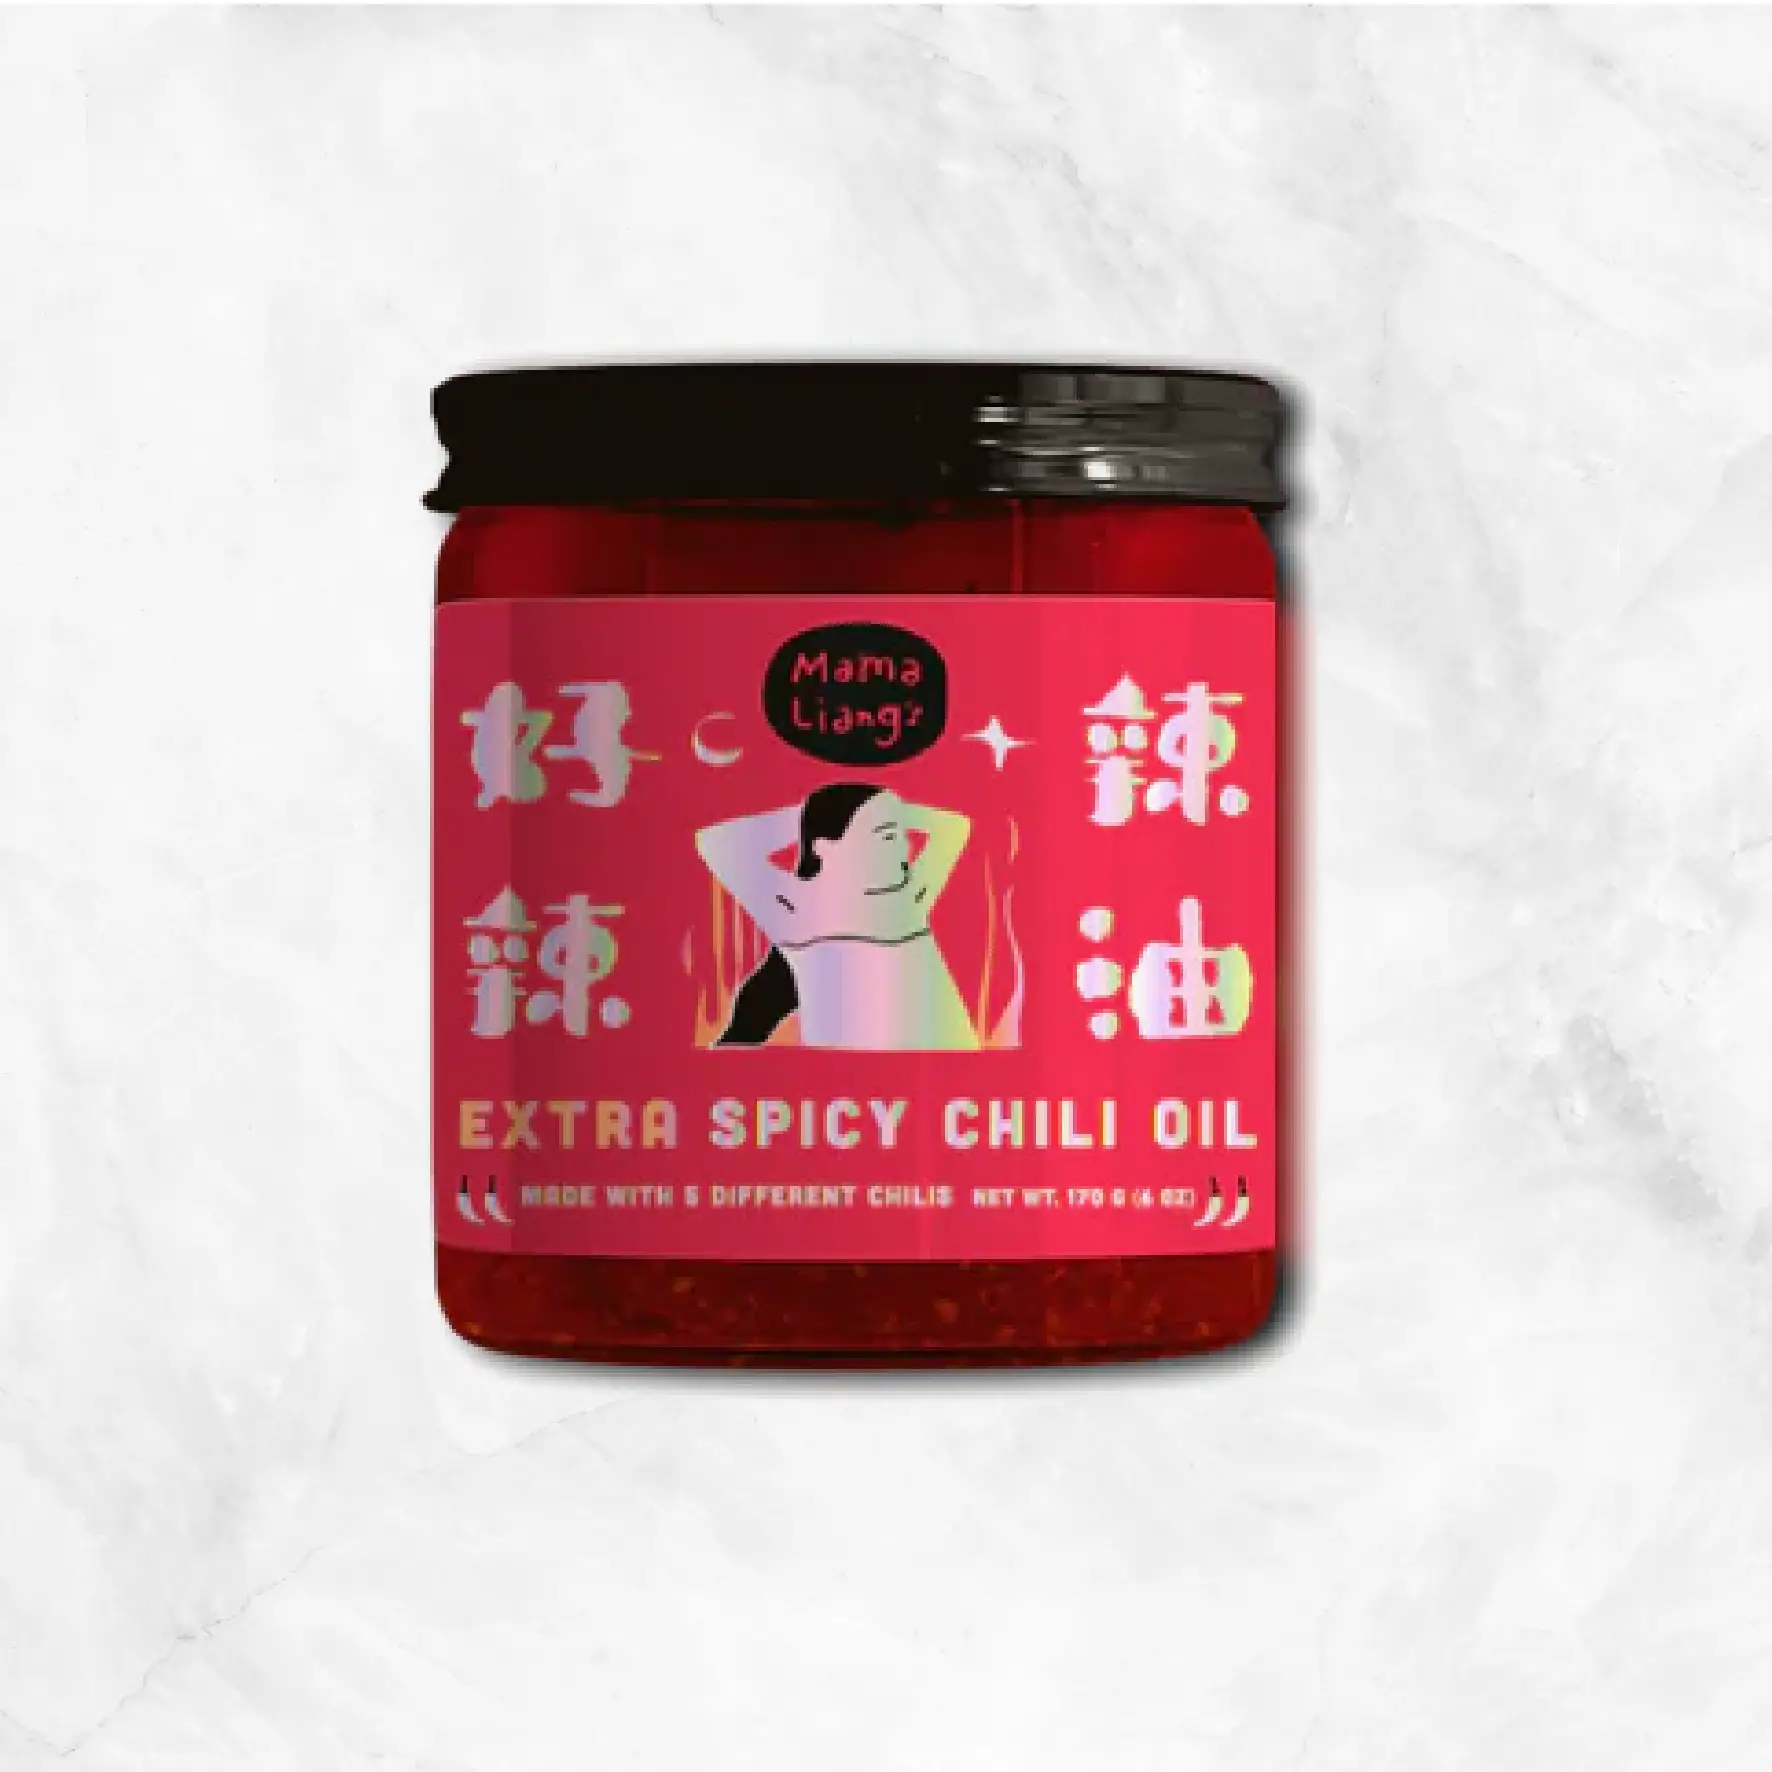 Extra Spicy Chili Oil Delivery